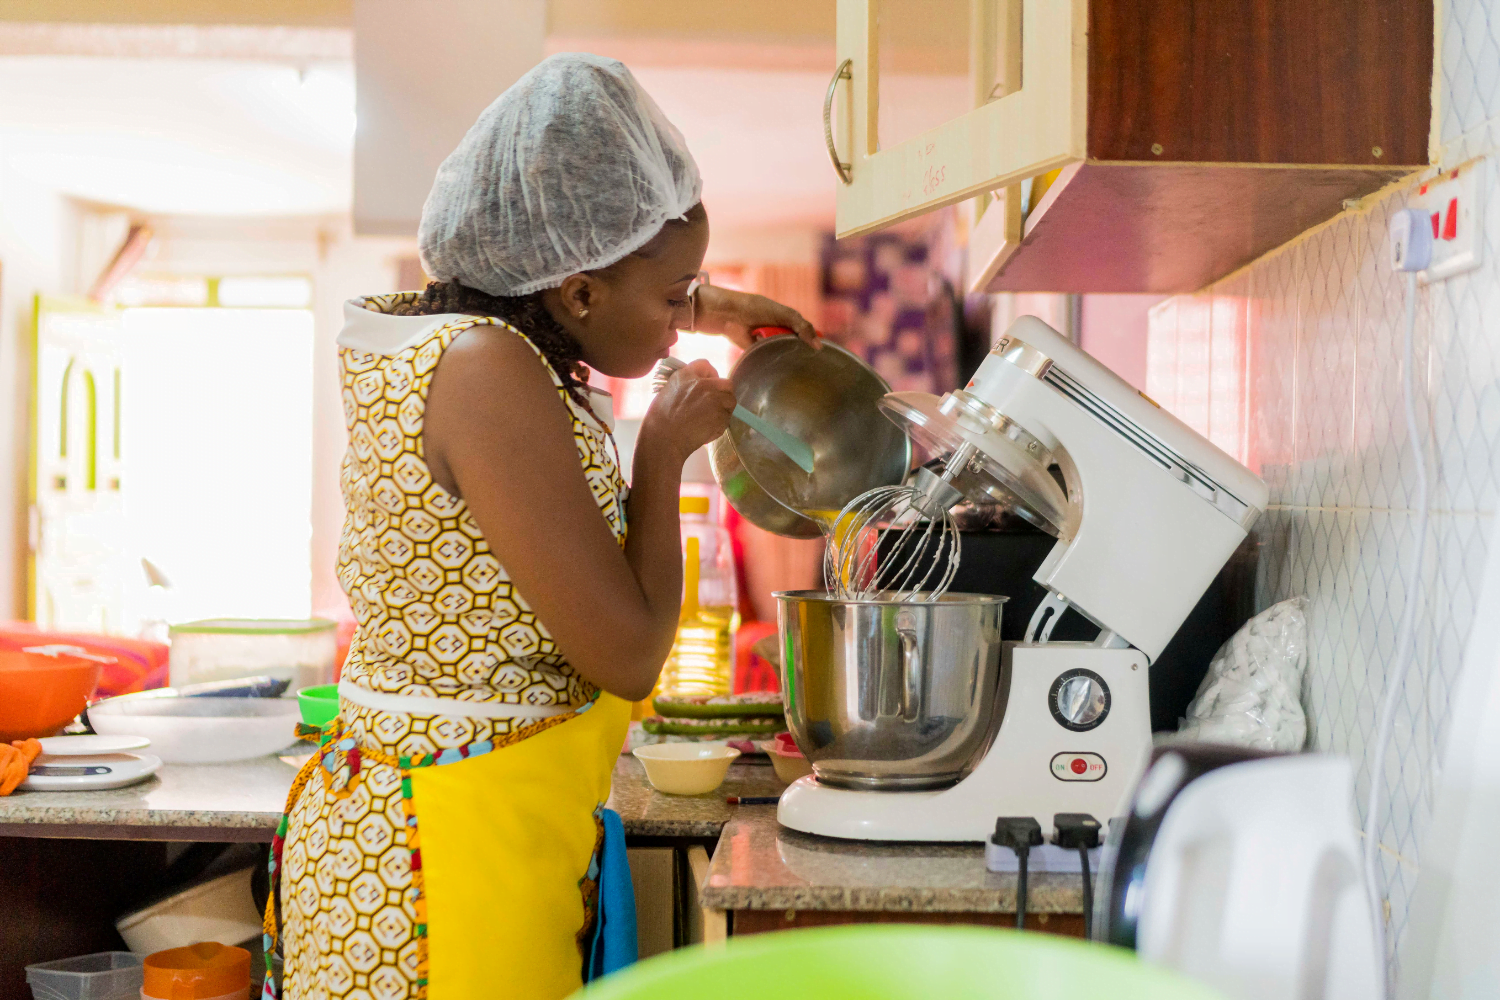 Esther Gathage, Owner of Herstees Bespoke Cakes, adds ingredients to her mixer.